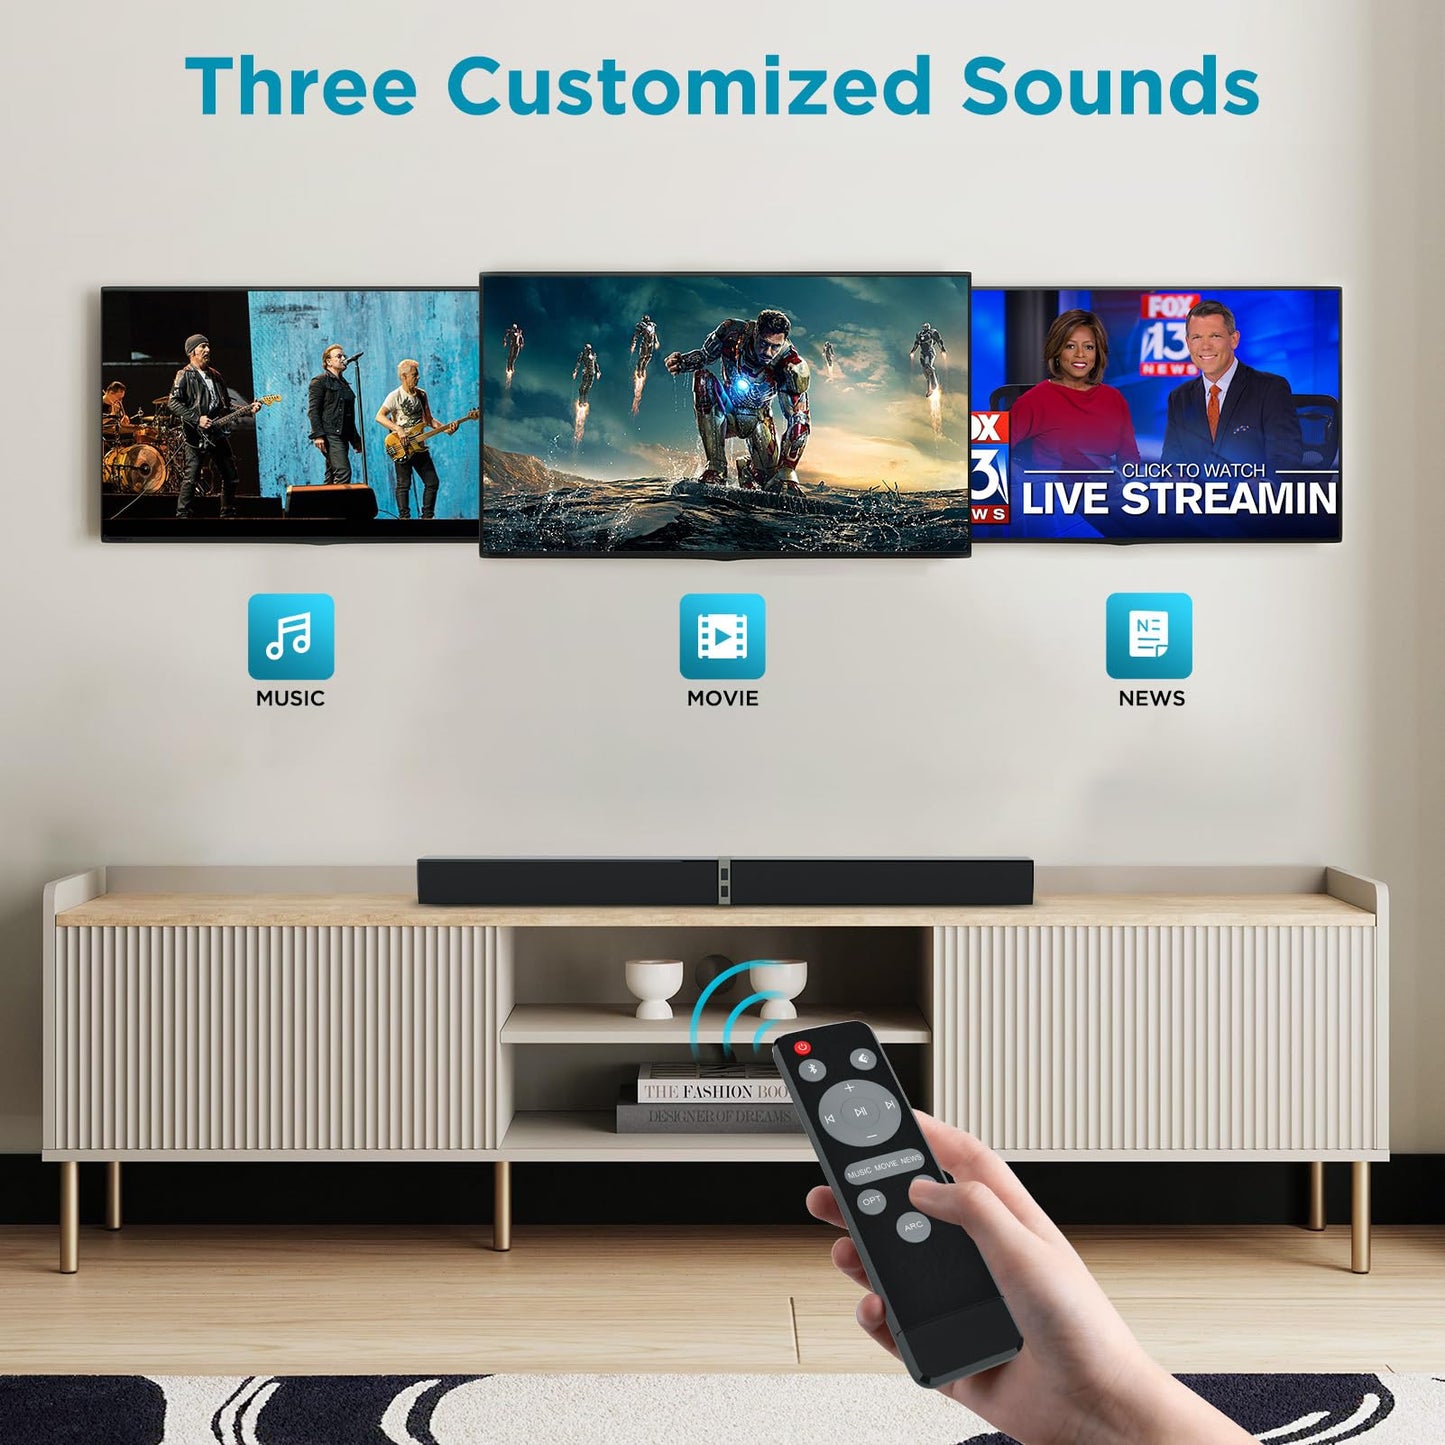 MZEIBO TV Sound Bar, 50W Bluetooth 5.0 Sound Bars for Smart TV, Surround Sound System with Powerful Bass, Home Theater Speakers with ARC/Optical/AUX, TV Speakers Soundbars with Split Design